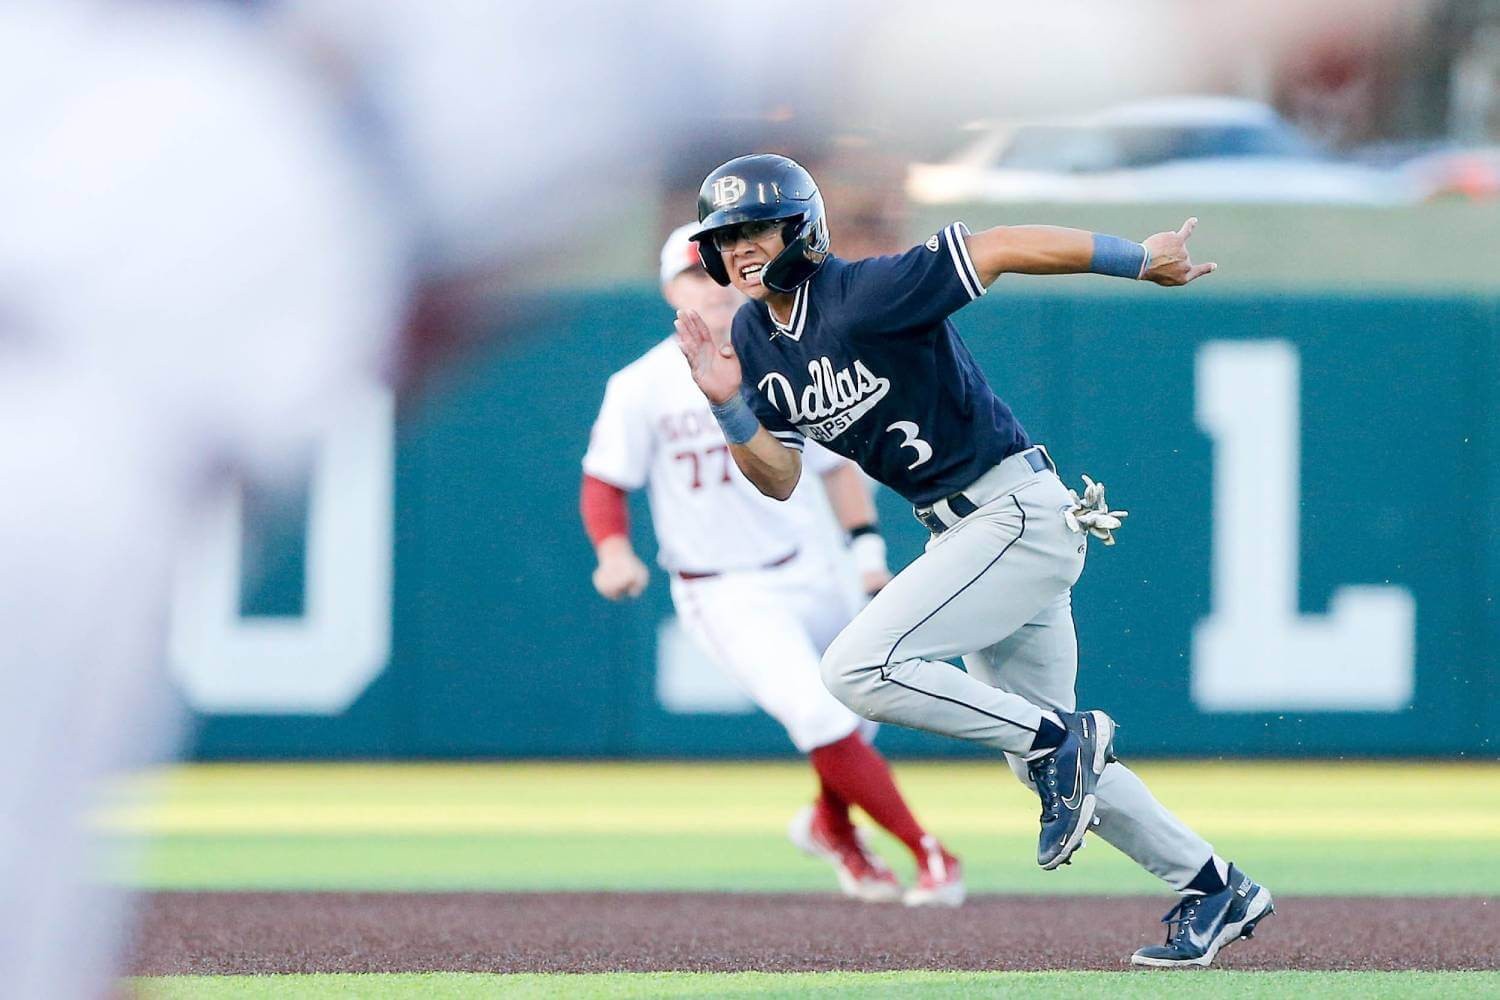 How Dallas Baptist became college baseball's most unlikely perennial contender